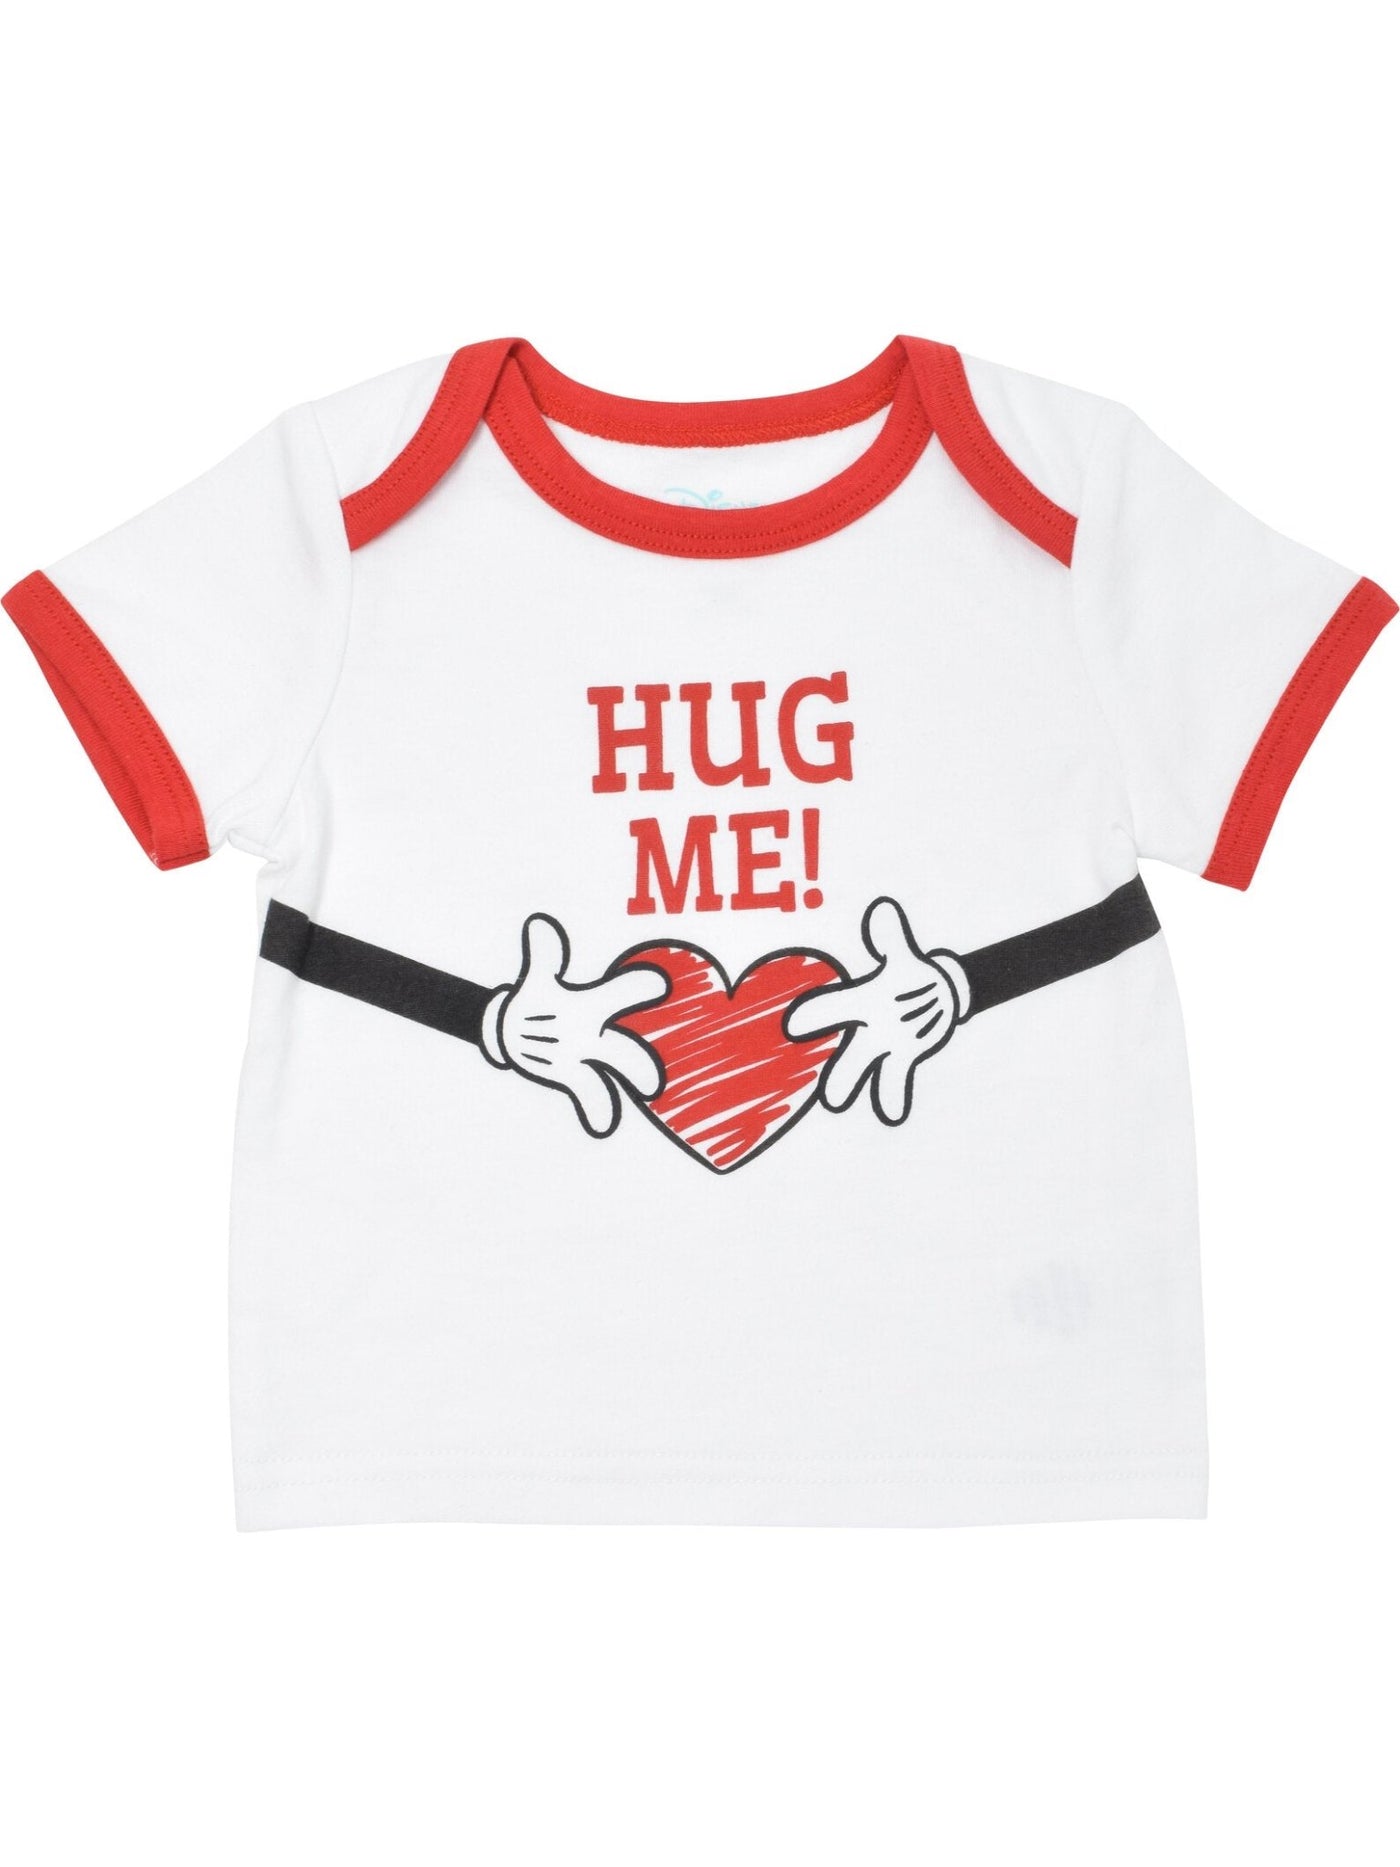 Disney Mickey Mouse T-Shirt and Diaper Cover Outfit Set - imagikids